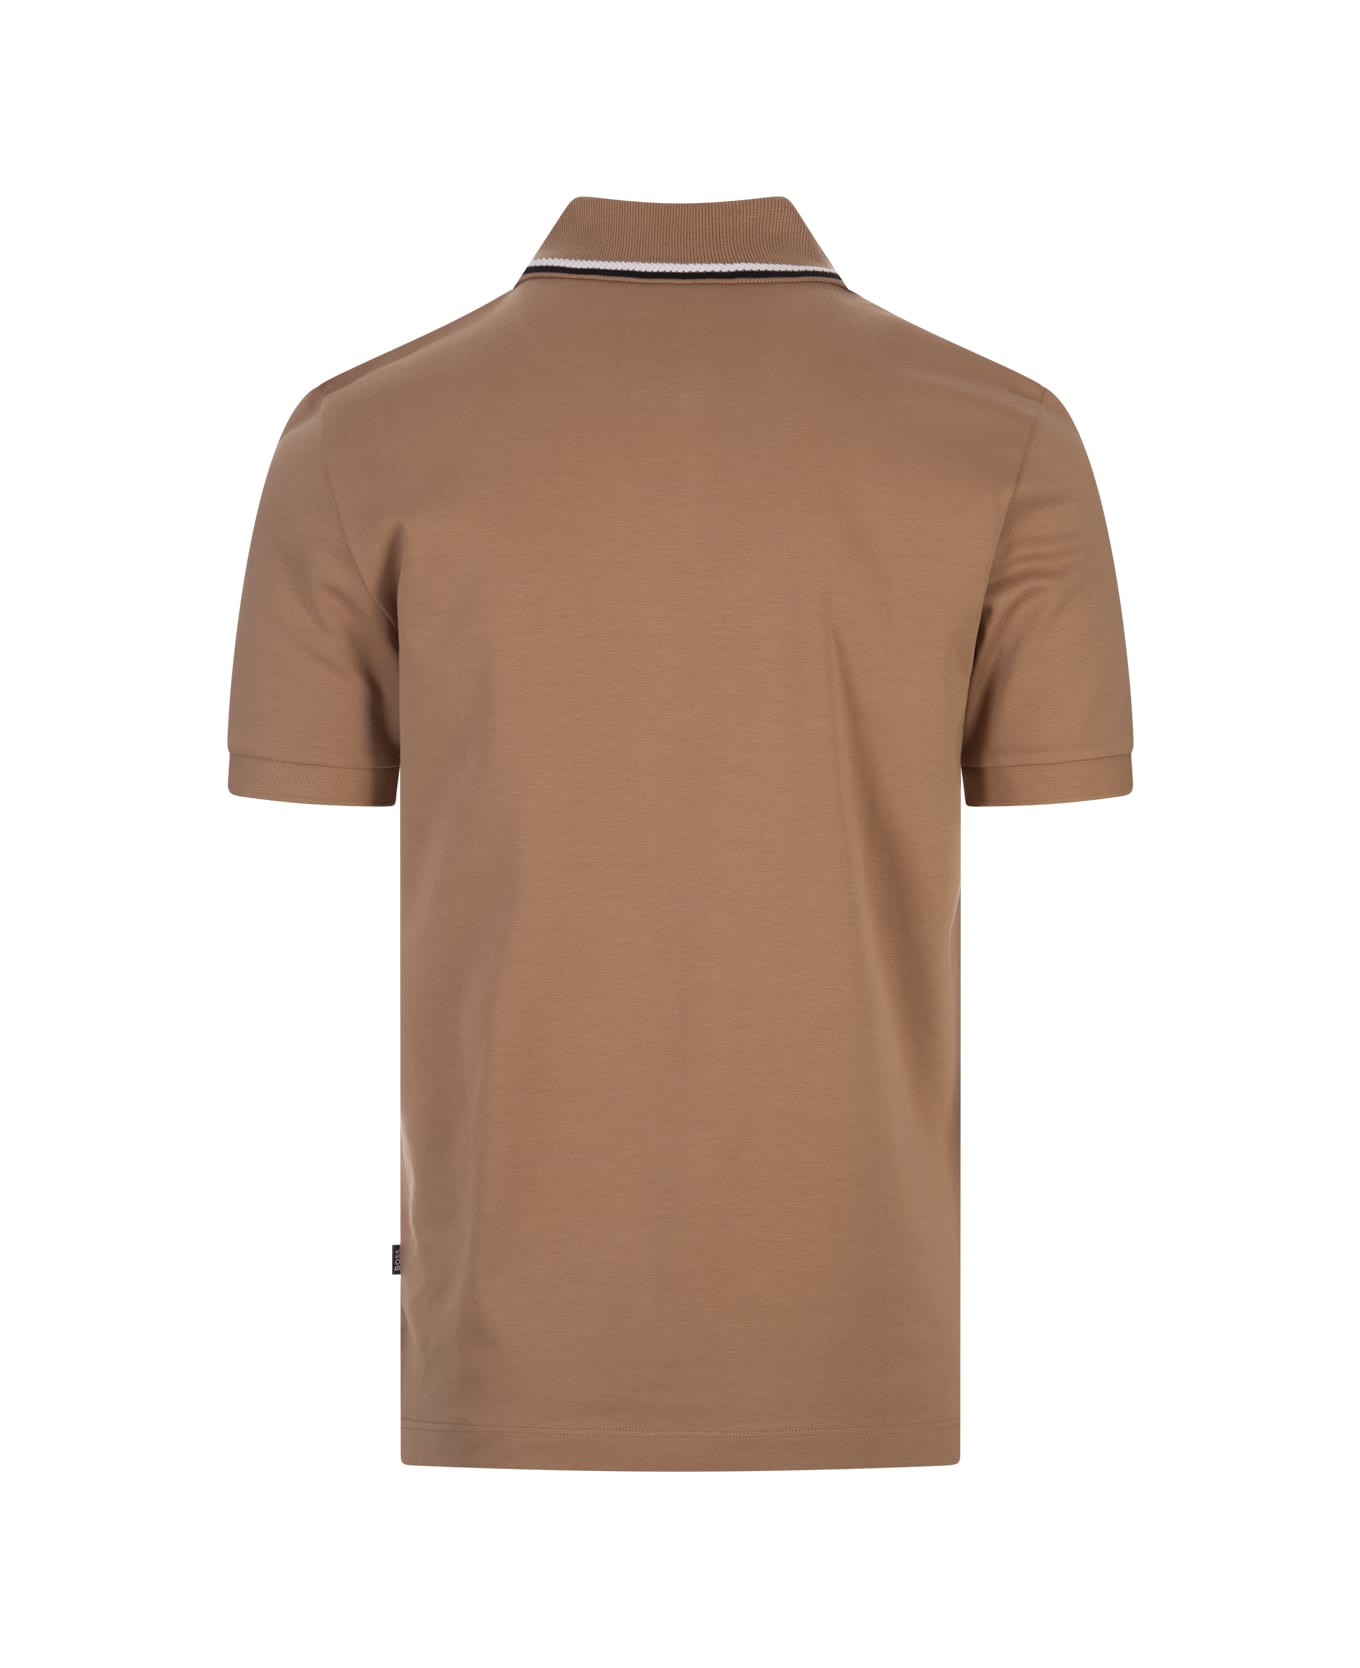 Hugo Boss Beige Slim Fit Polo Shirt With Striped Collar - Brown